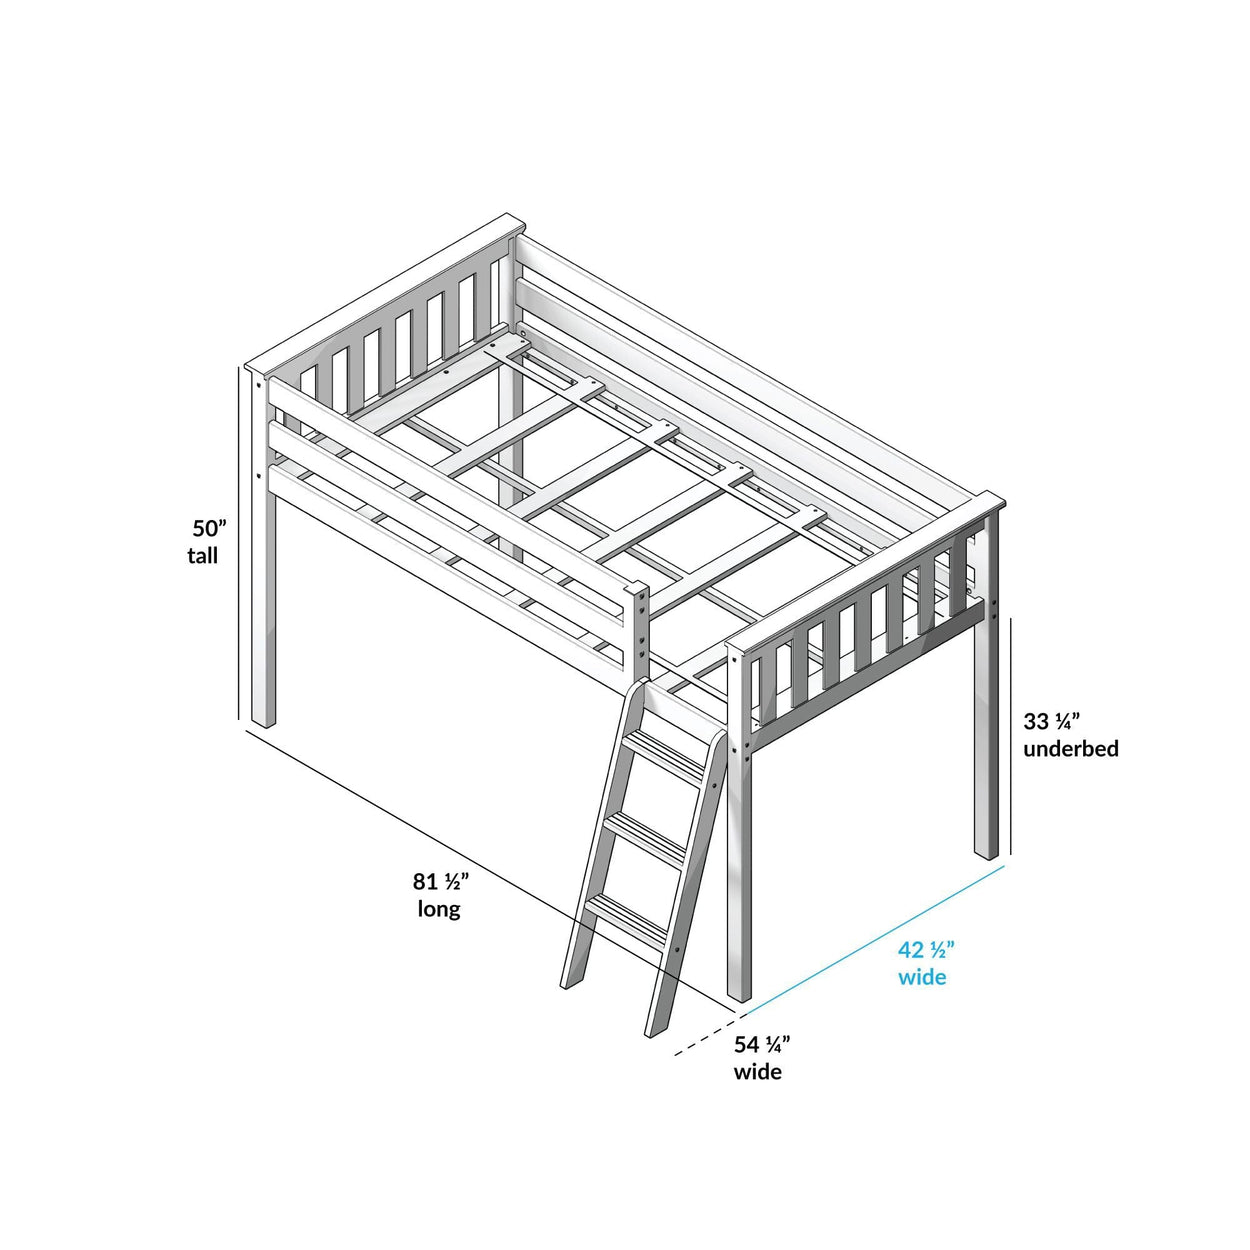 180212151022 : Loft Beds Twin-Size Low Loft With Curtain, Clay + Blue